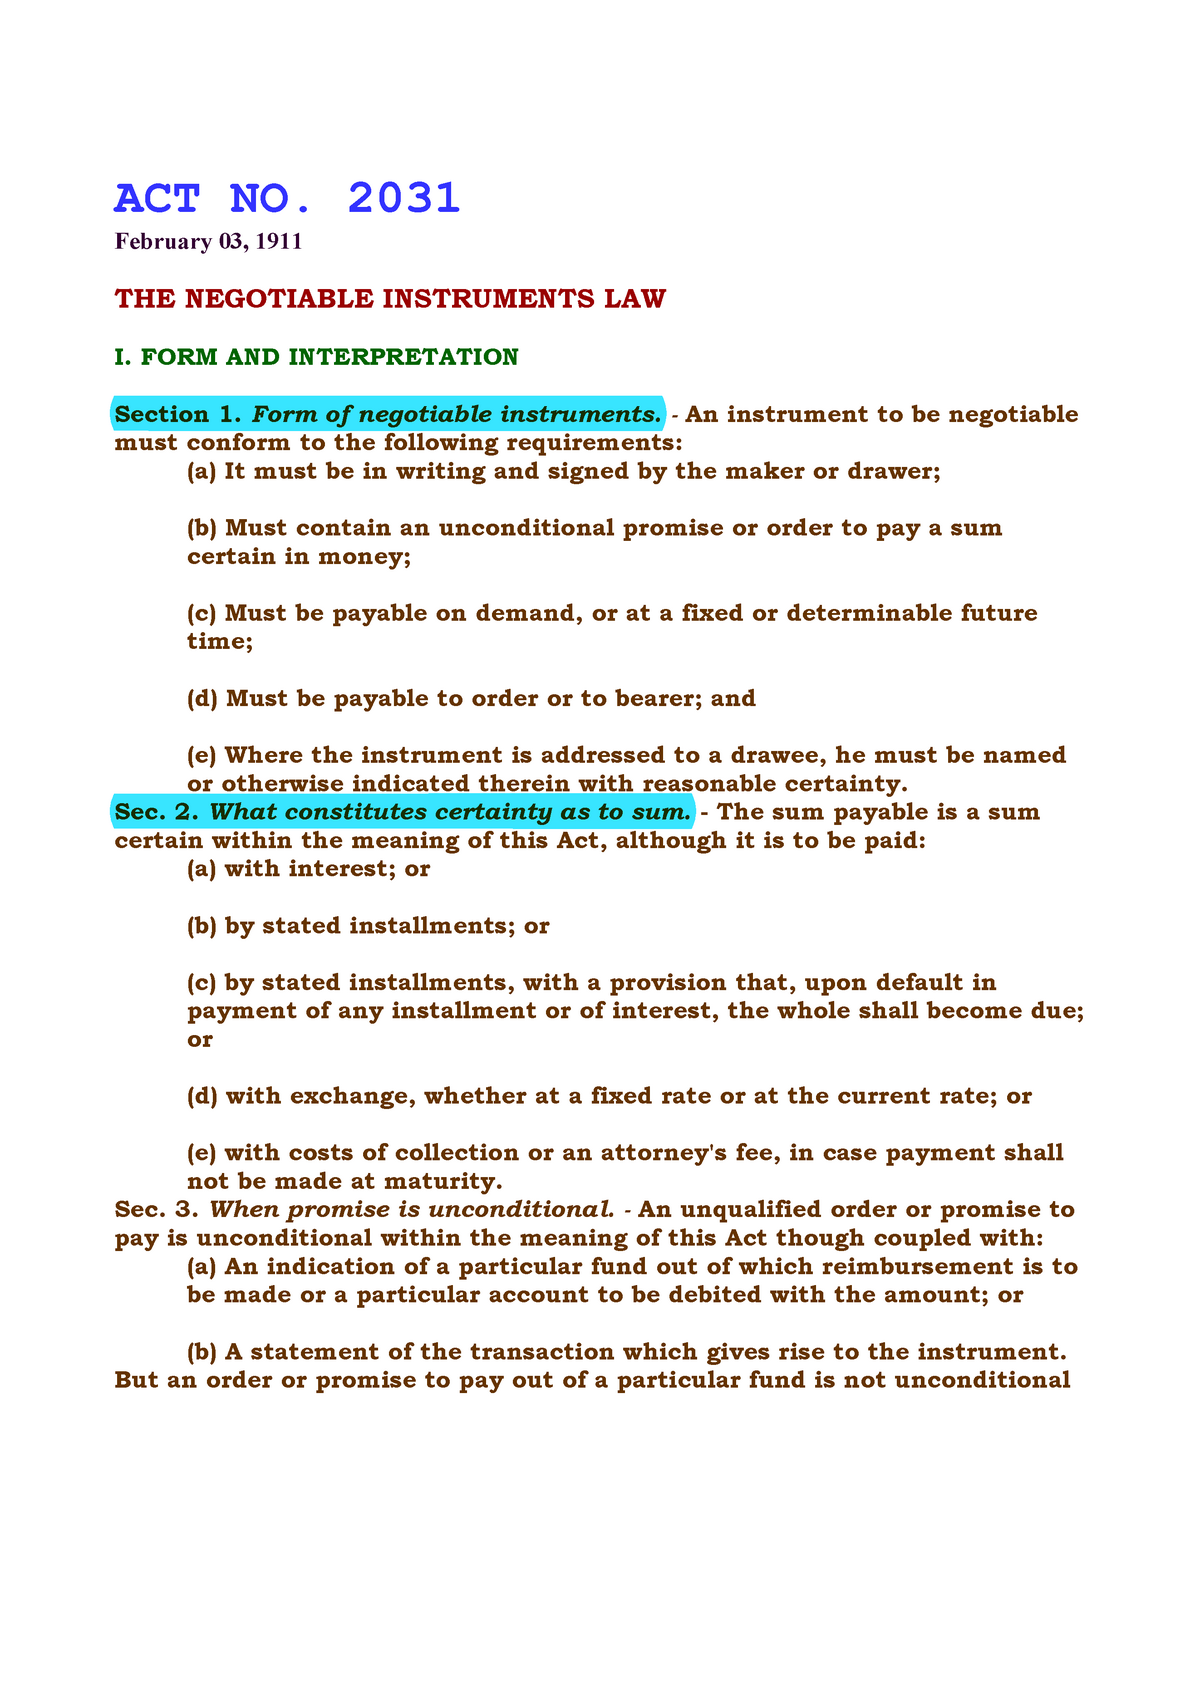 dissertation on negotiable instrument act